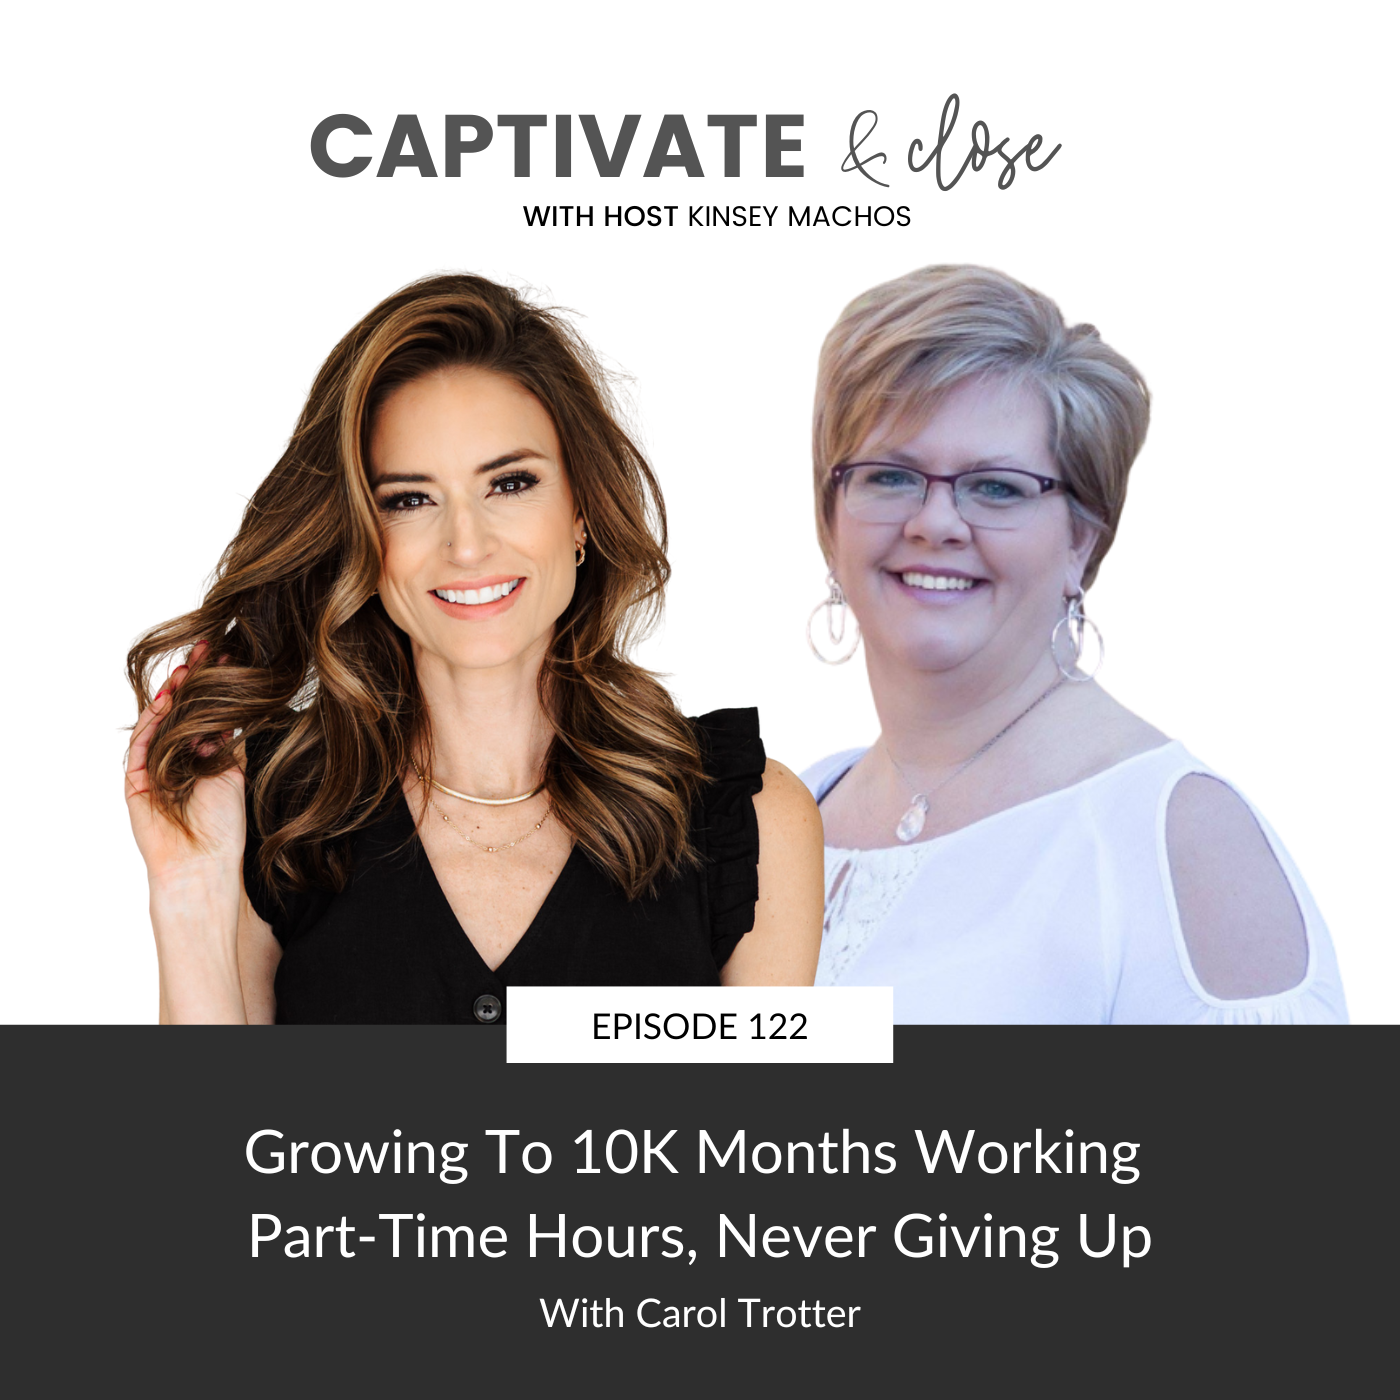 Growing To 10K Months Working Part-Time Hours, Never Giving Up with Carol Trotter